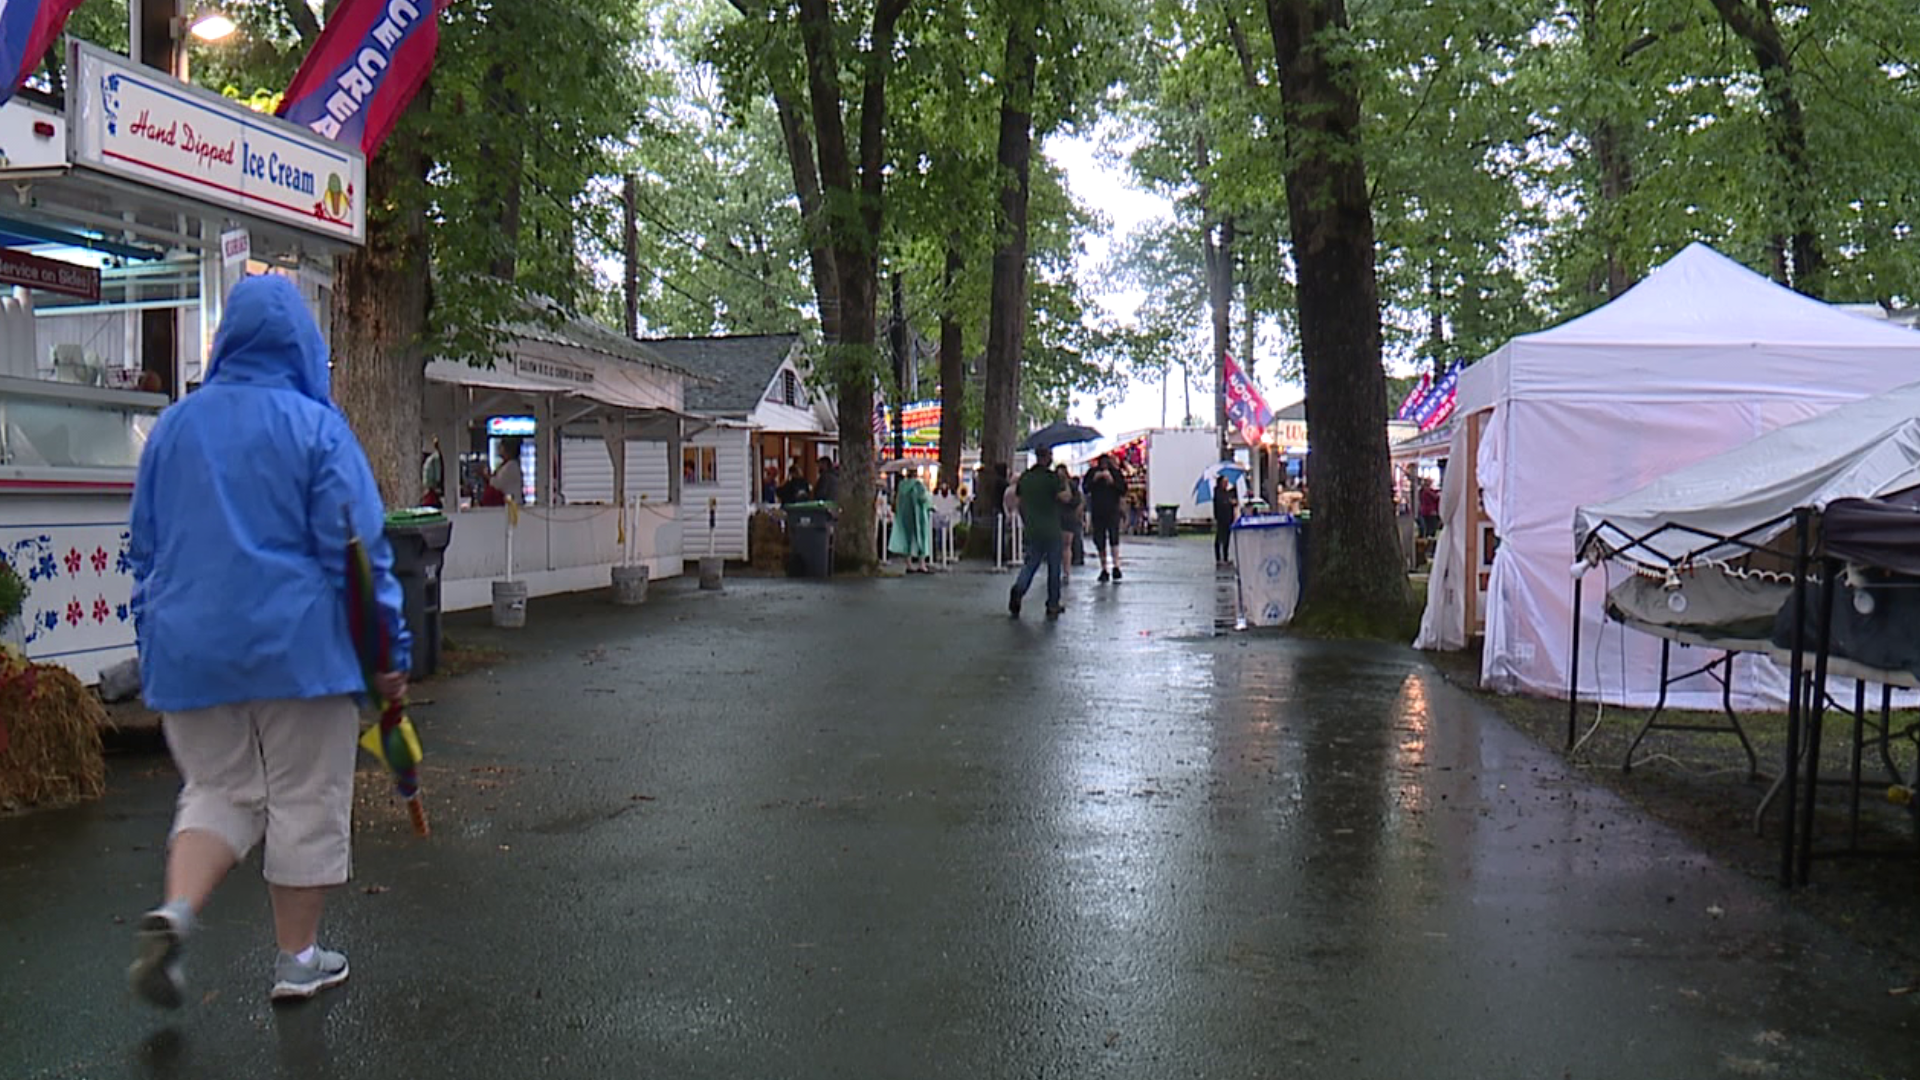 The fair continues until Saturday in Monroe County.